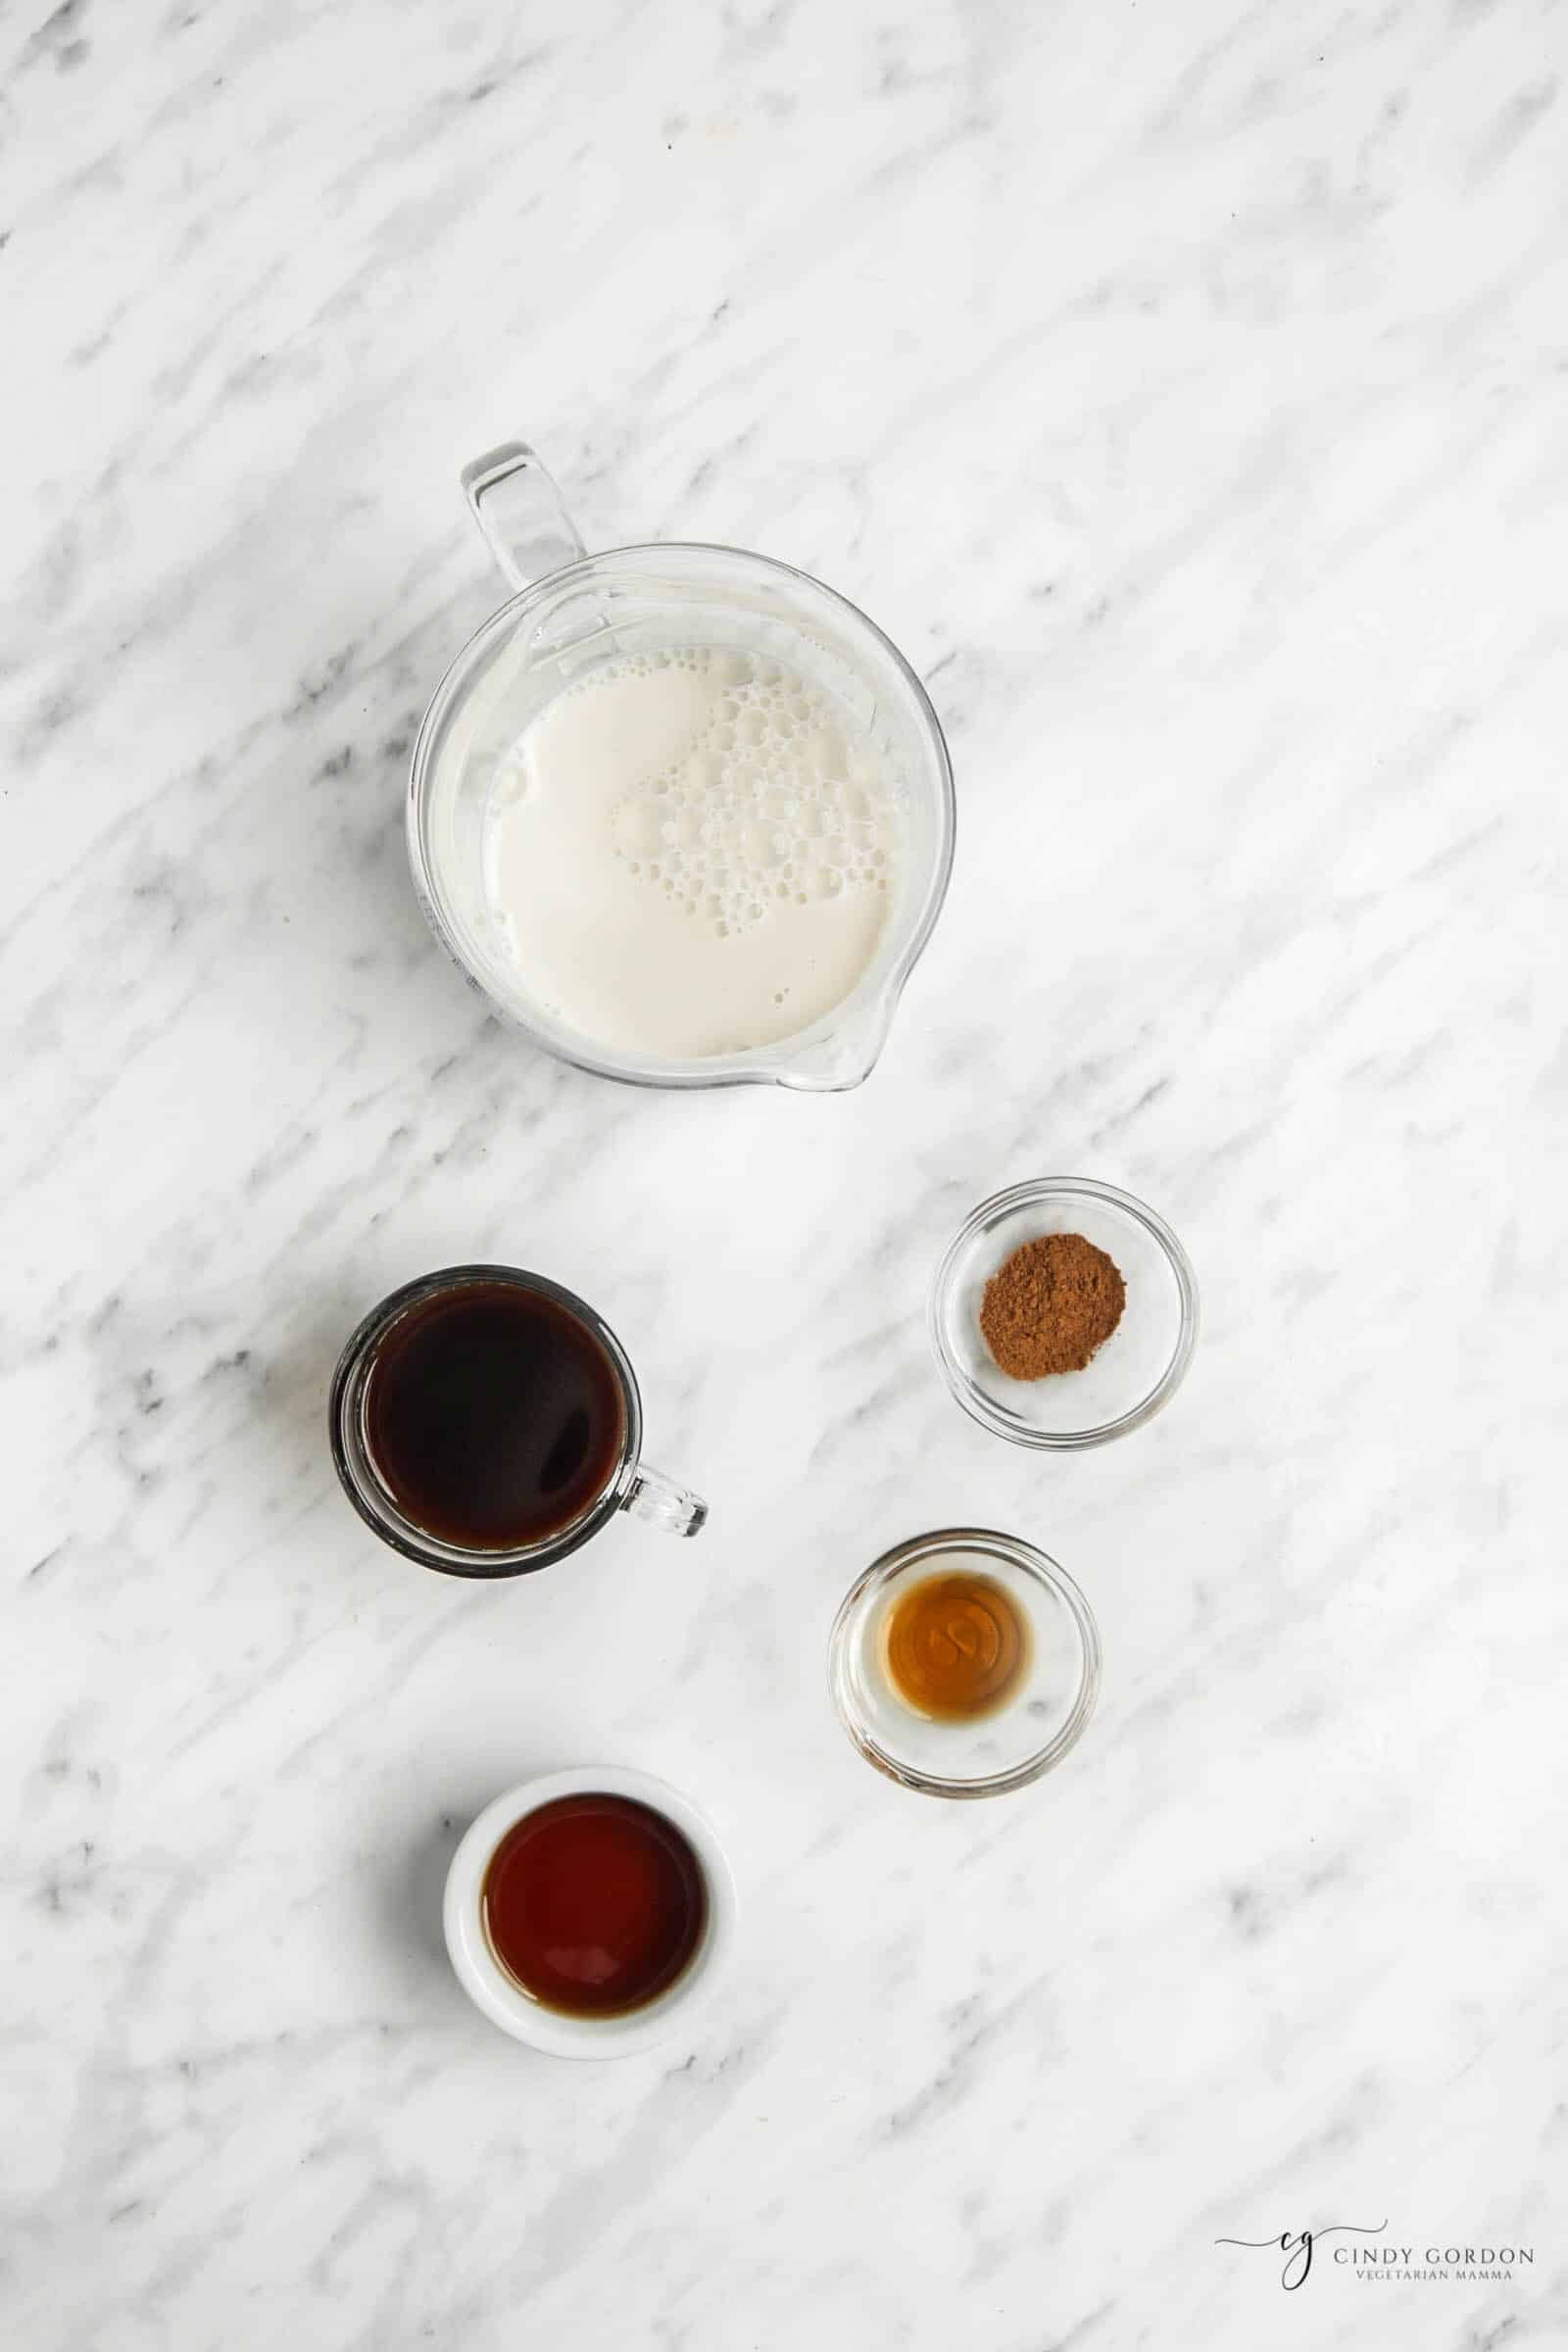 Top view photo of ingredients to make Oat Milk Latte, in separate bowls.